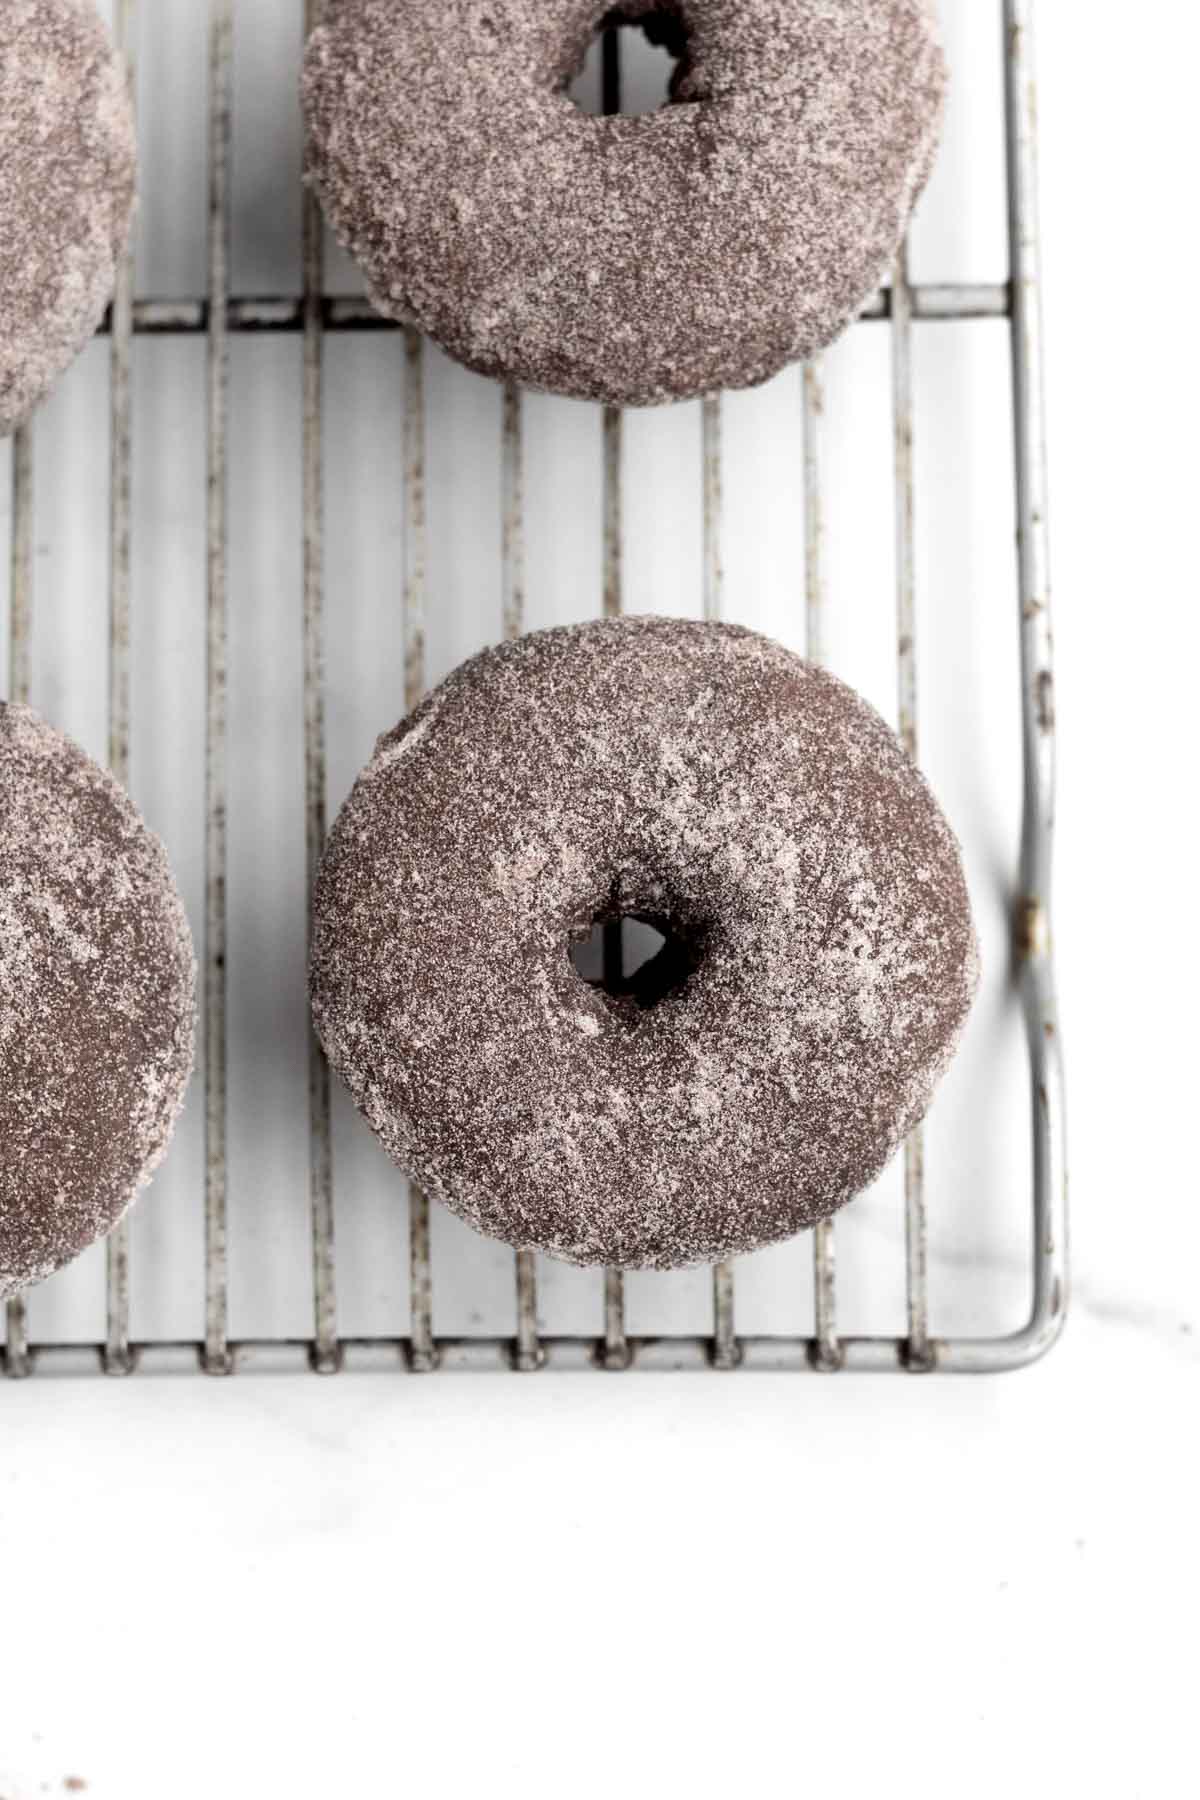 The second coat of cocoa sugar completes the Chocolate Sugared Donuts.